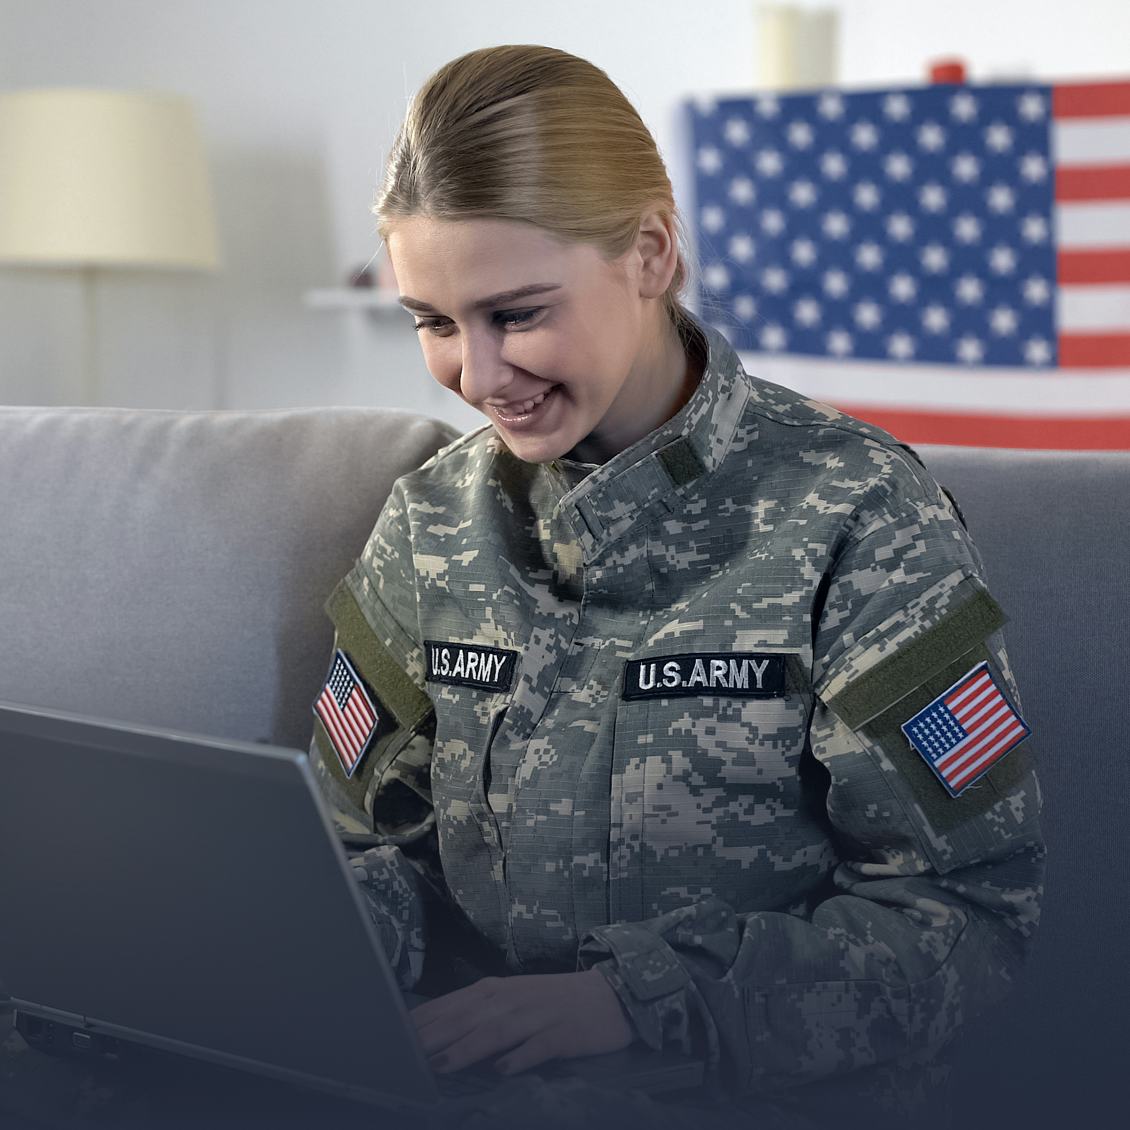 A military woman with a laptop and a US flag on the background